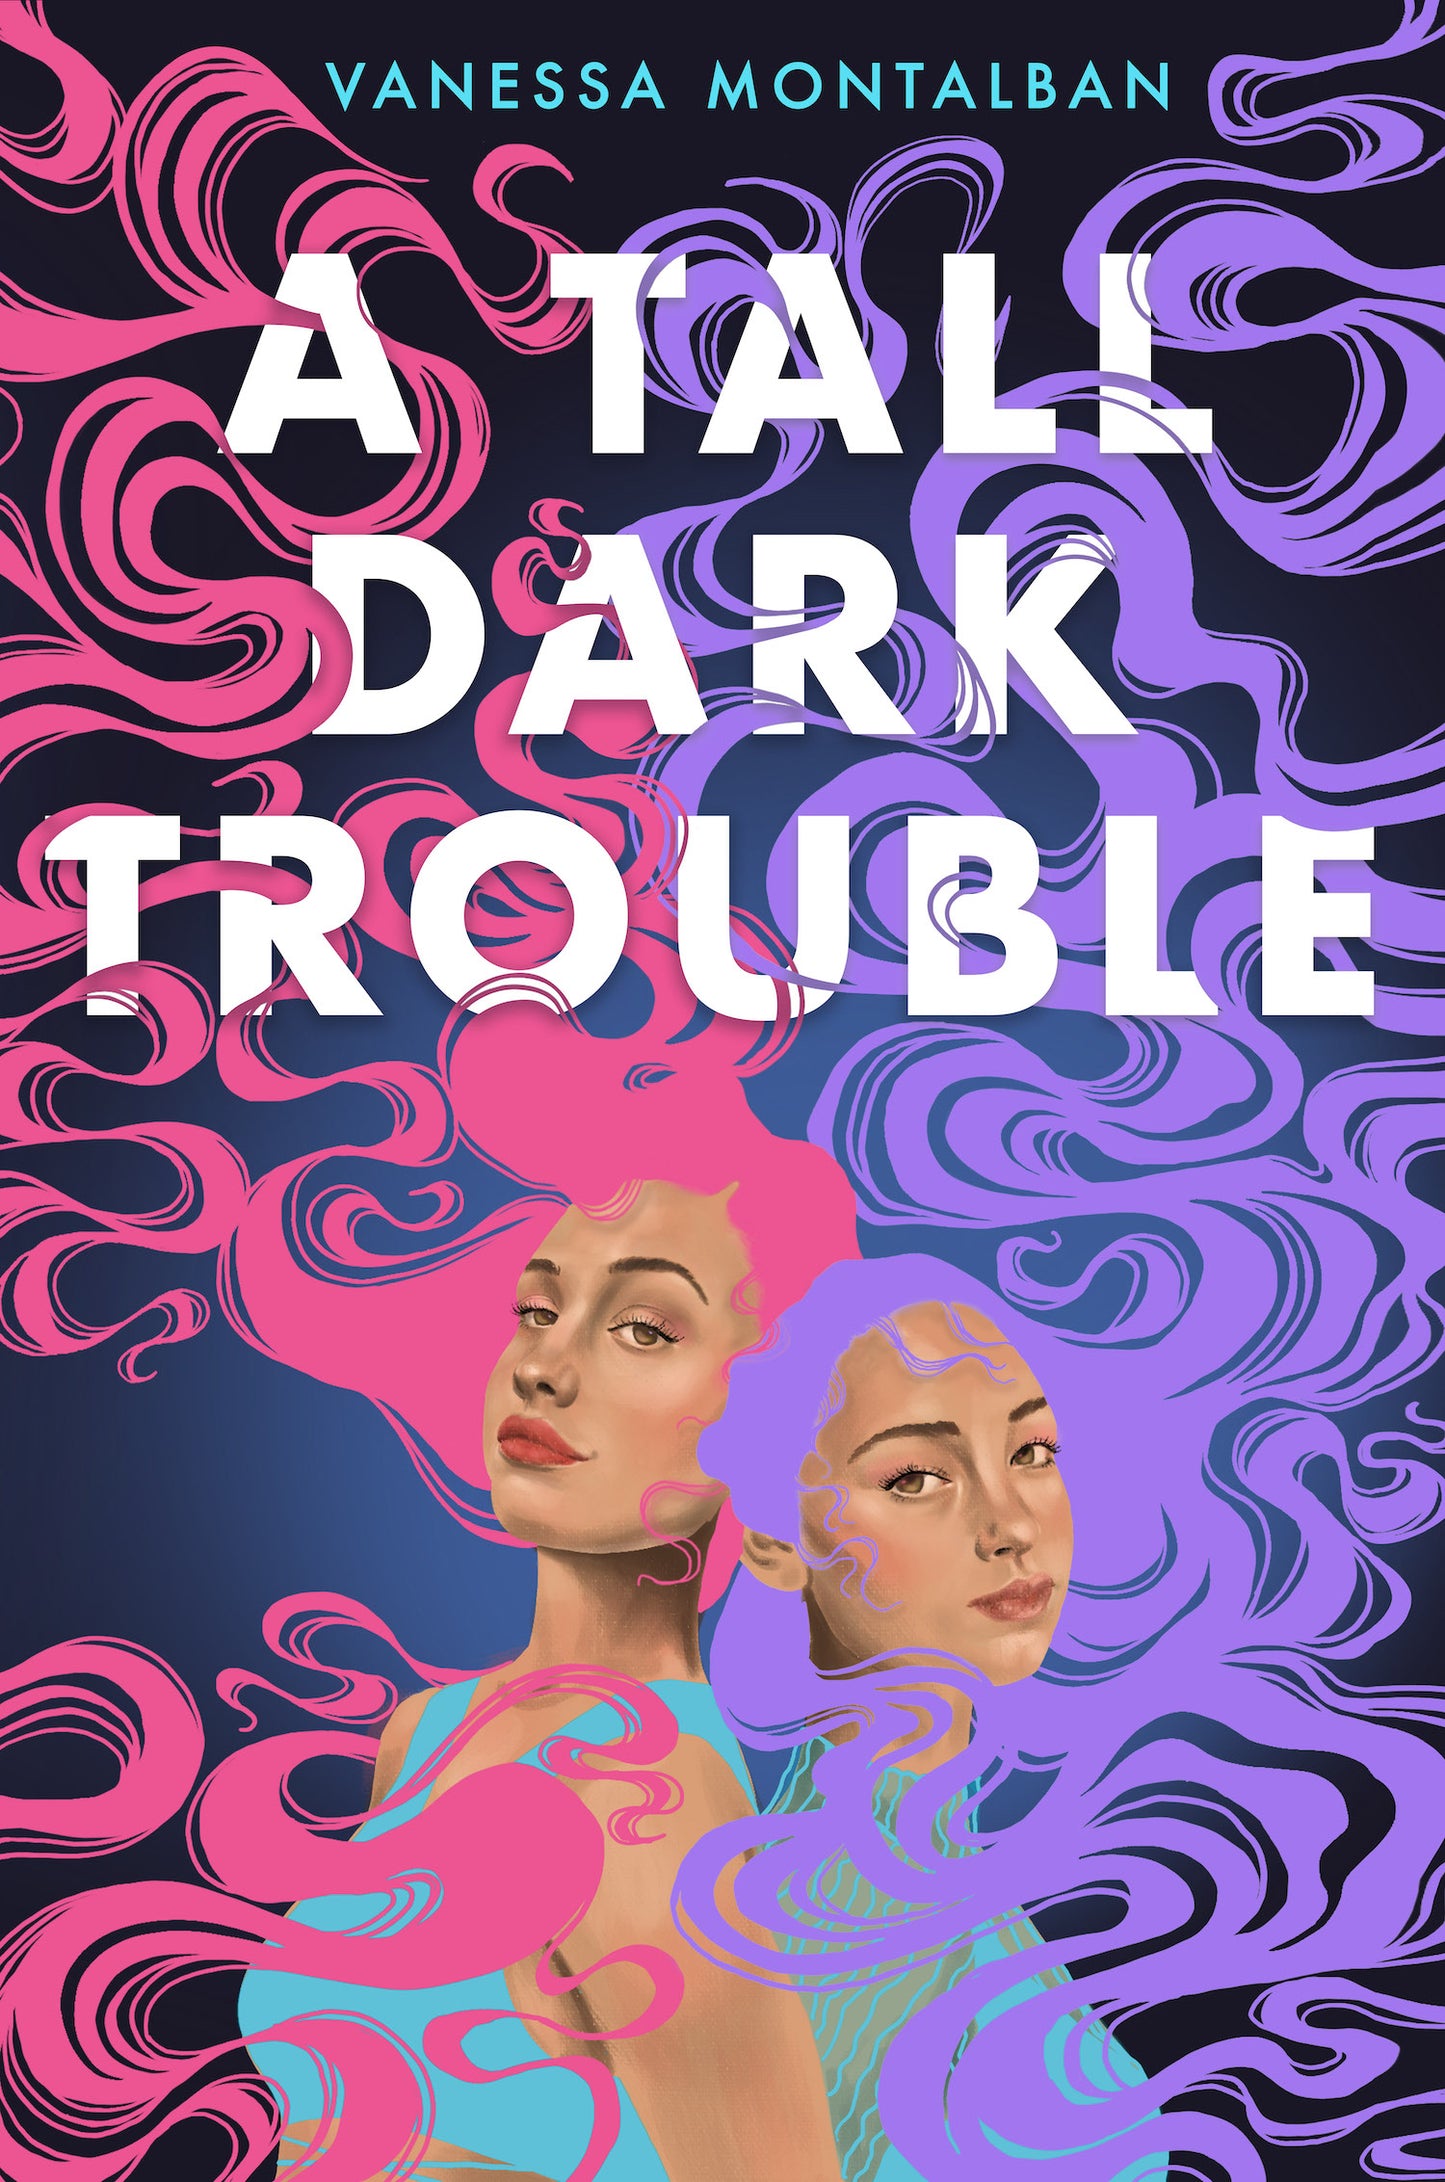 A Tall Dark Trouble by Vanessa Montalban